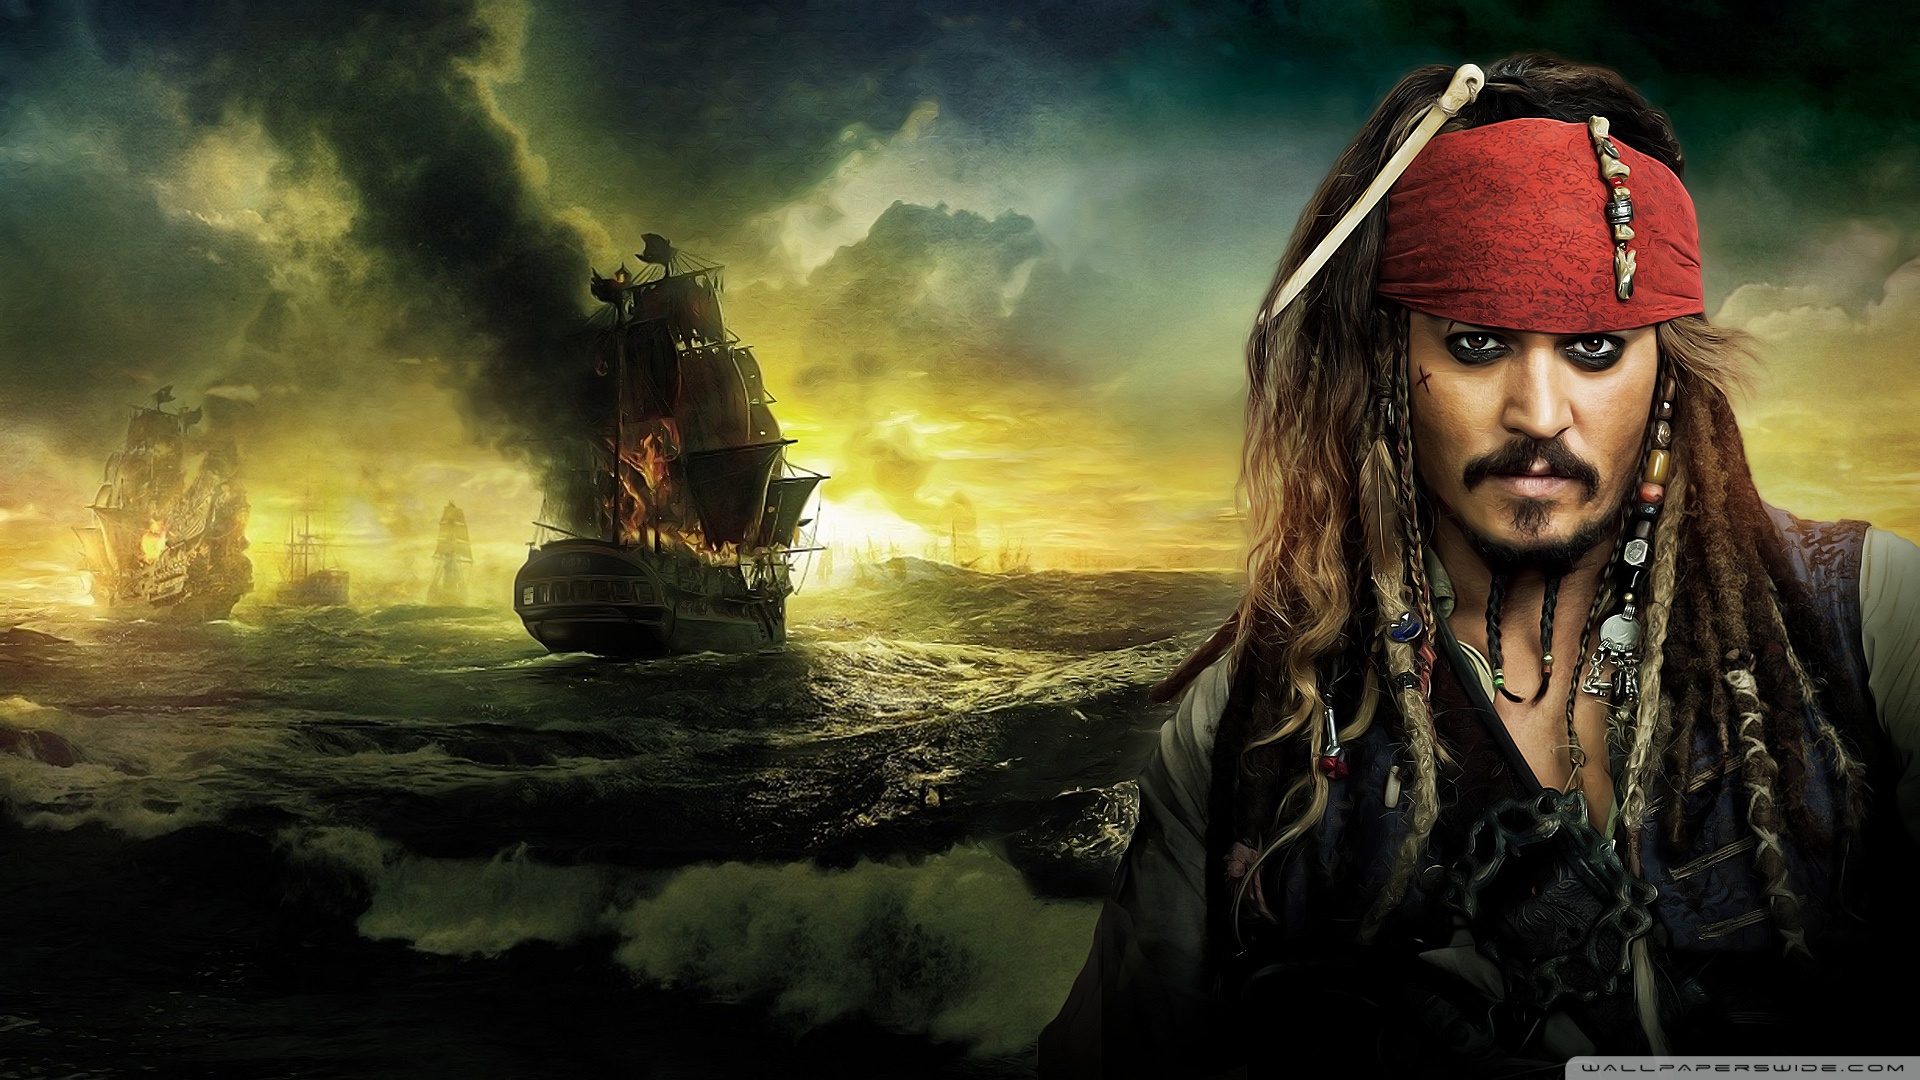 Free download Pirates Of The Caribbean On Stranger Tides Johnny Deep As Capitain [1920x1080] for your Desktop, Mobile & Tablet. Explore Pirates of the Caribbean Wallpaper. Caribbean Wallpaper Widescreen